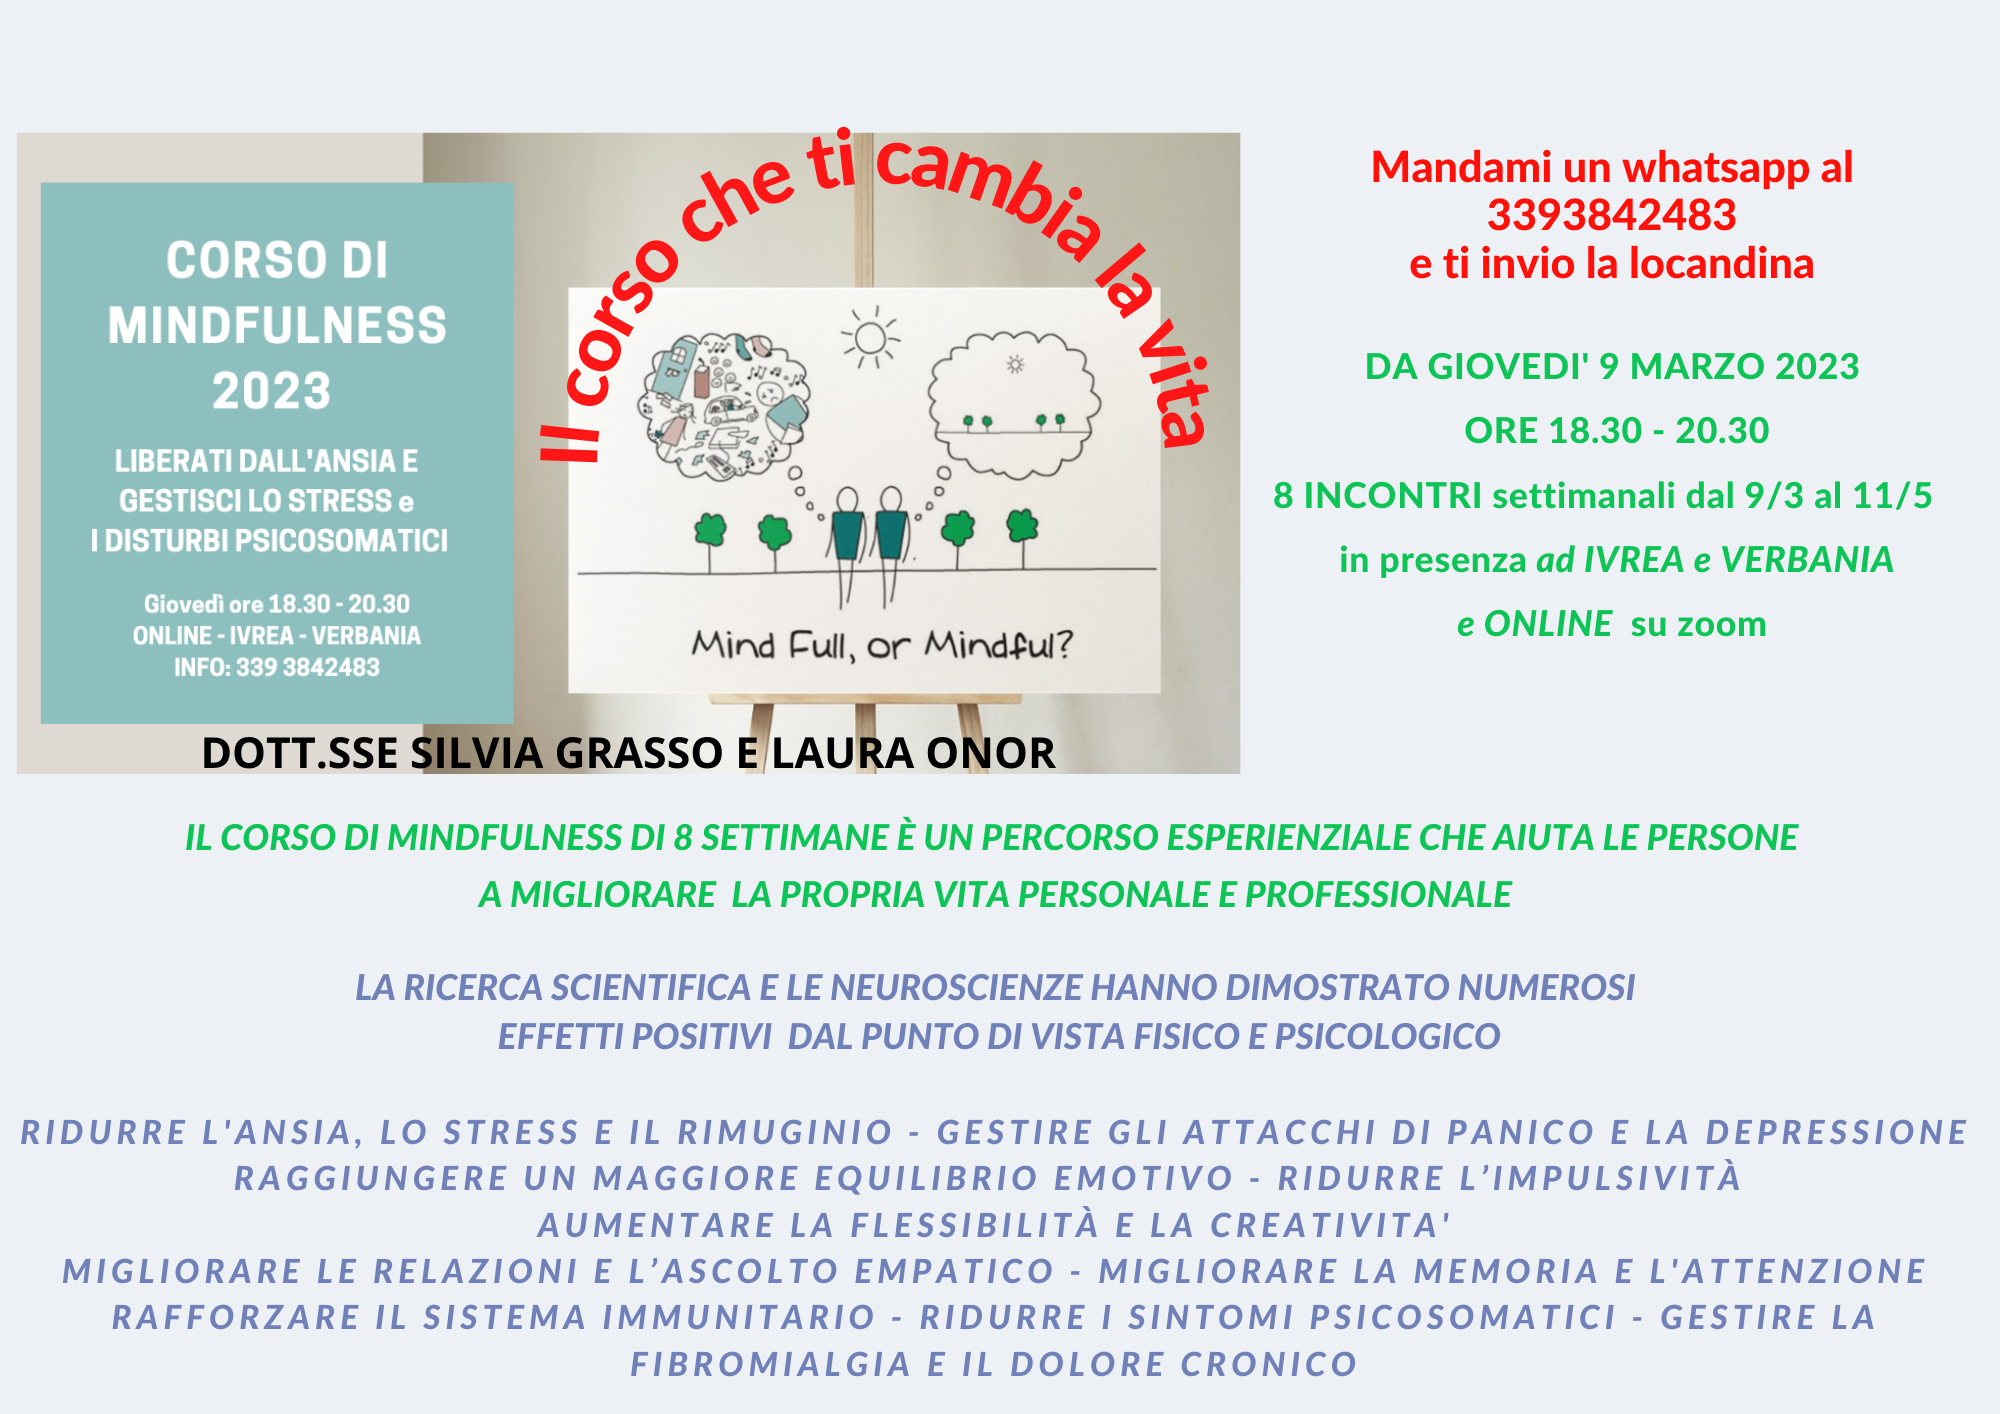 http://mindfulmente.it/wp-content/uploads/2023/02/CORSO-MINDFULNESS-2023.png